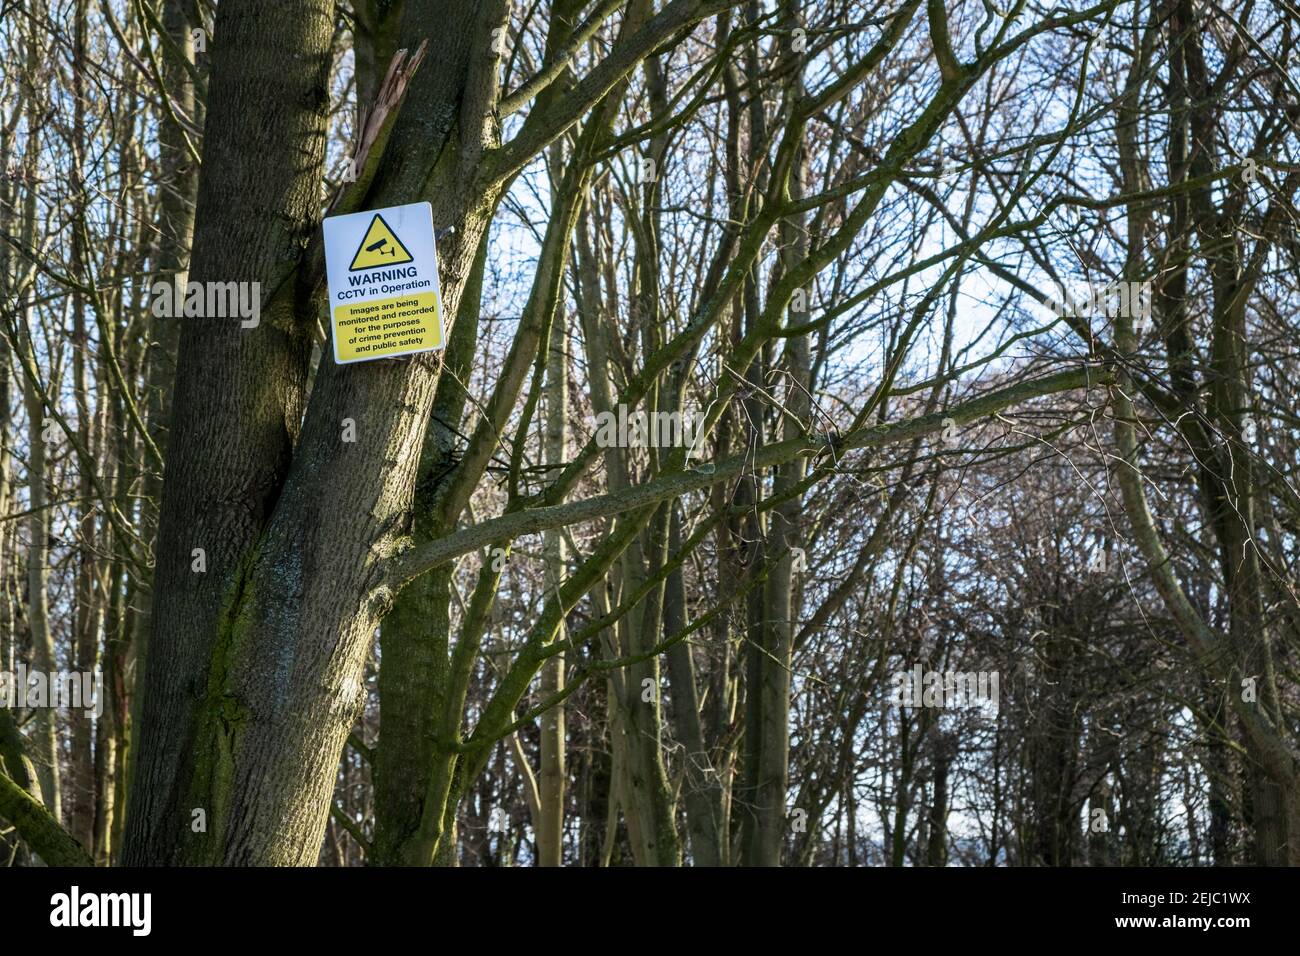 CCTV sign on a tree warning of CCTV in operation in a woodland, Nottinghamshire, England, UK Stock Photo